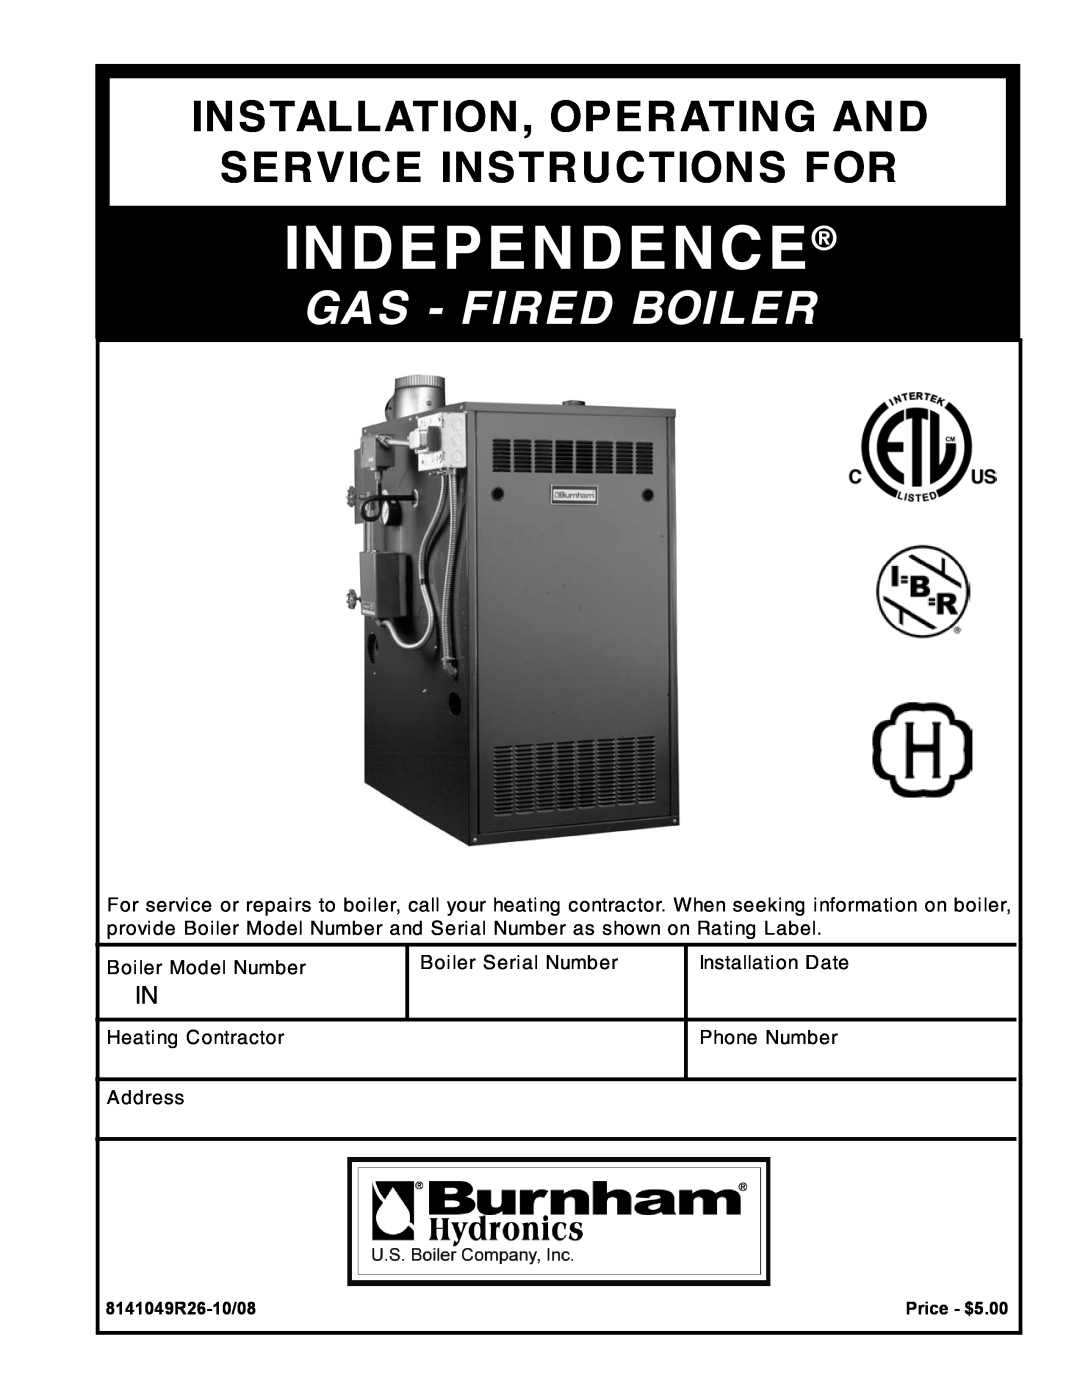 Burnham IN10 manual Independence, Gas - Fired Boiler, Installation, Operating And Service Instructions For, Phone Number 